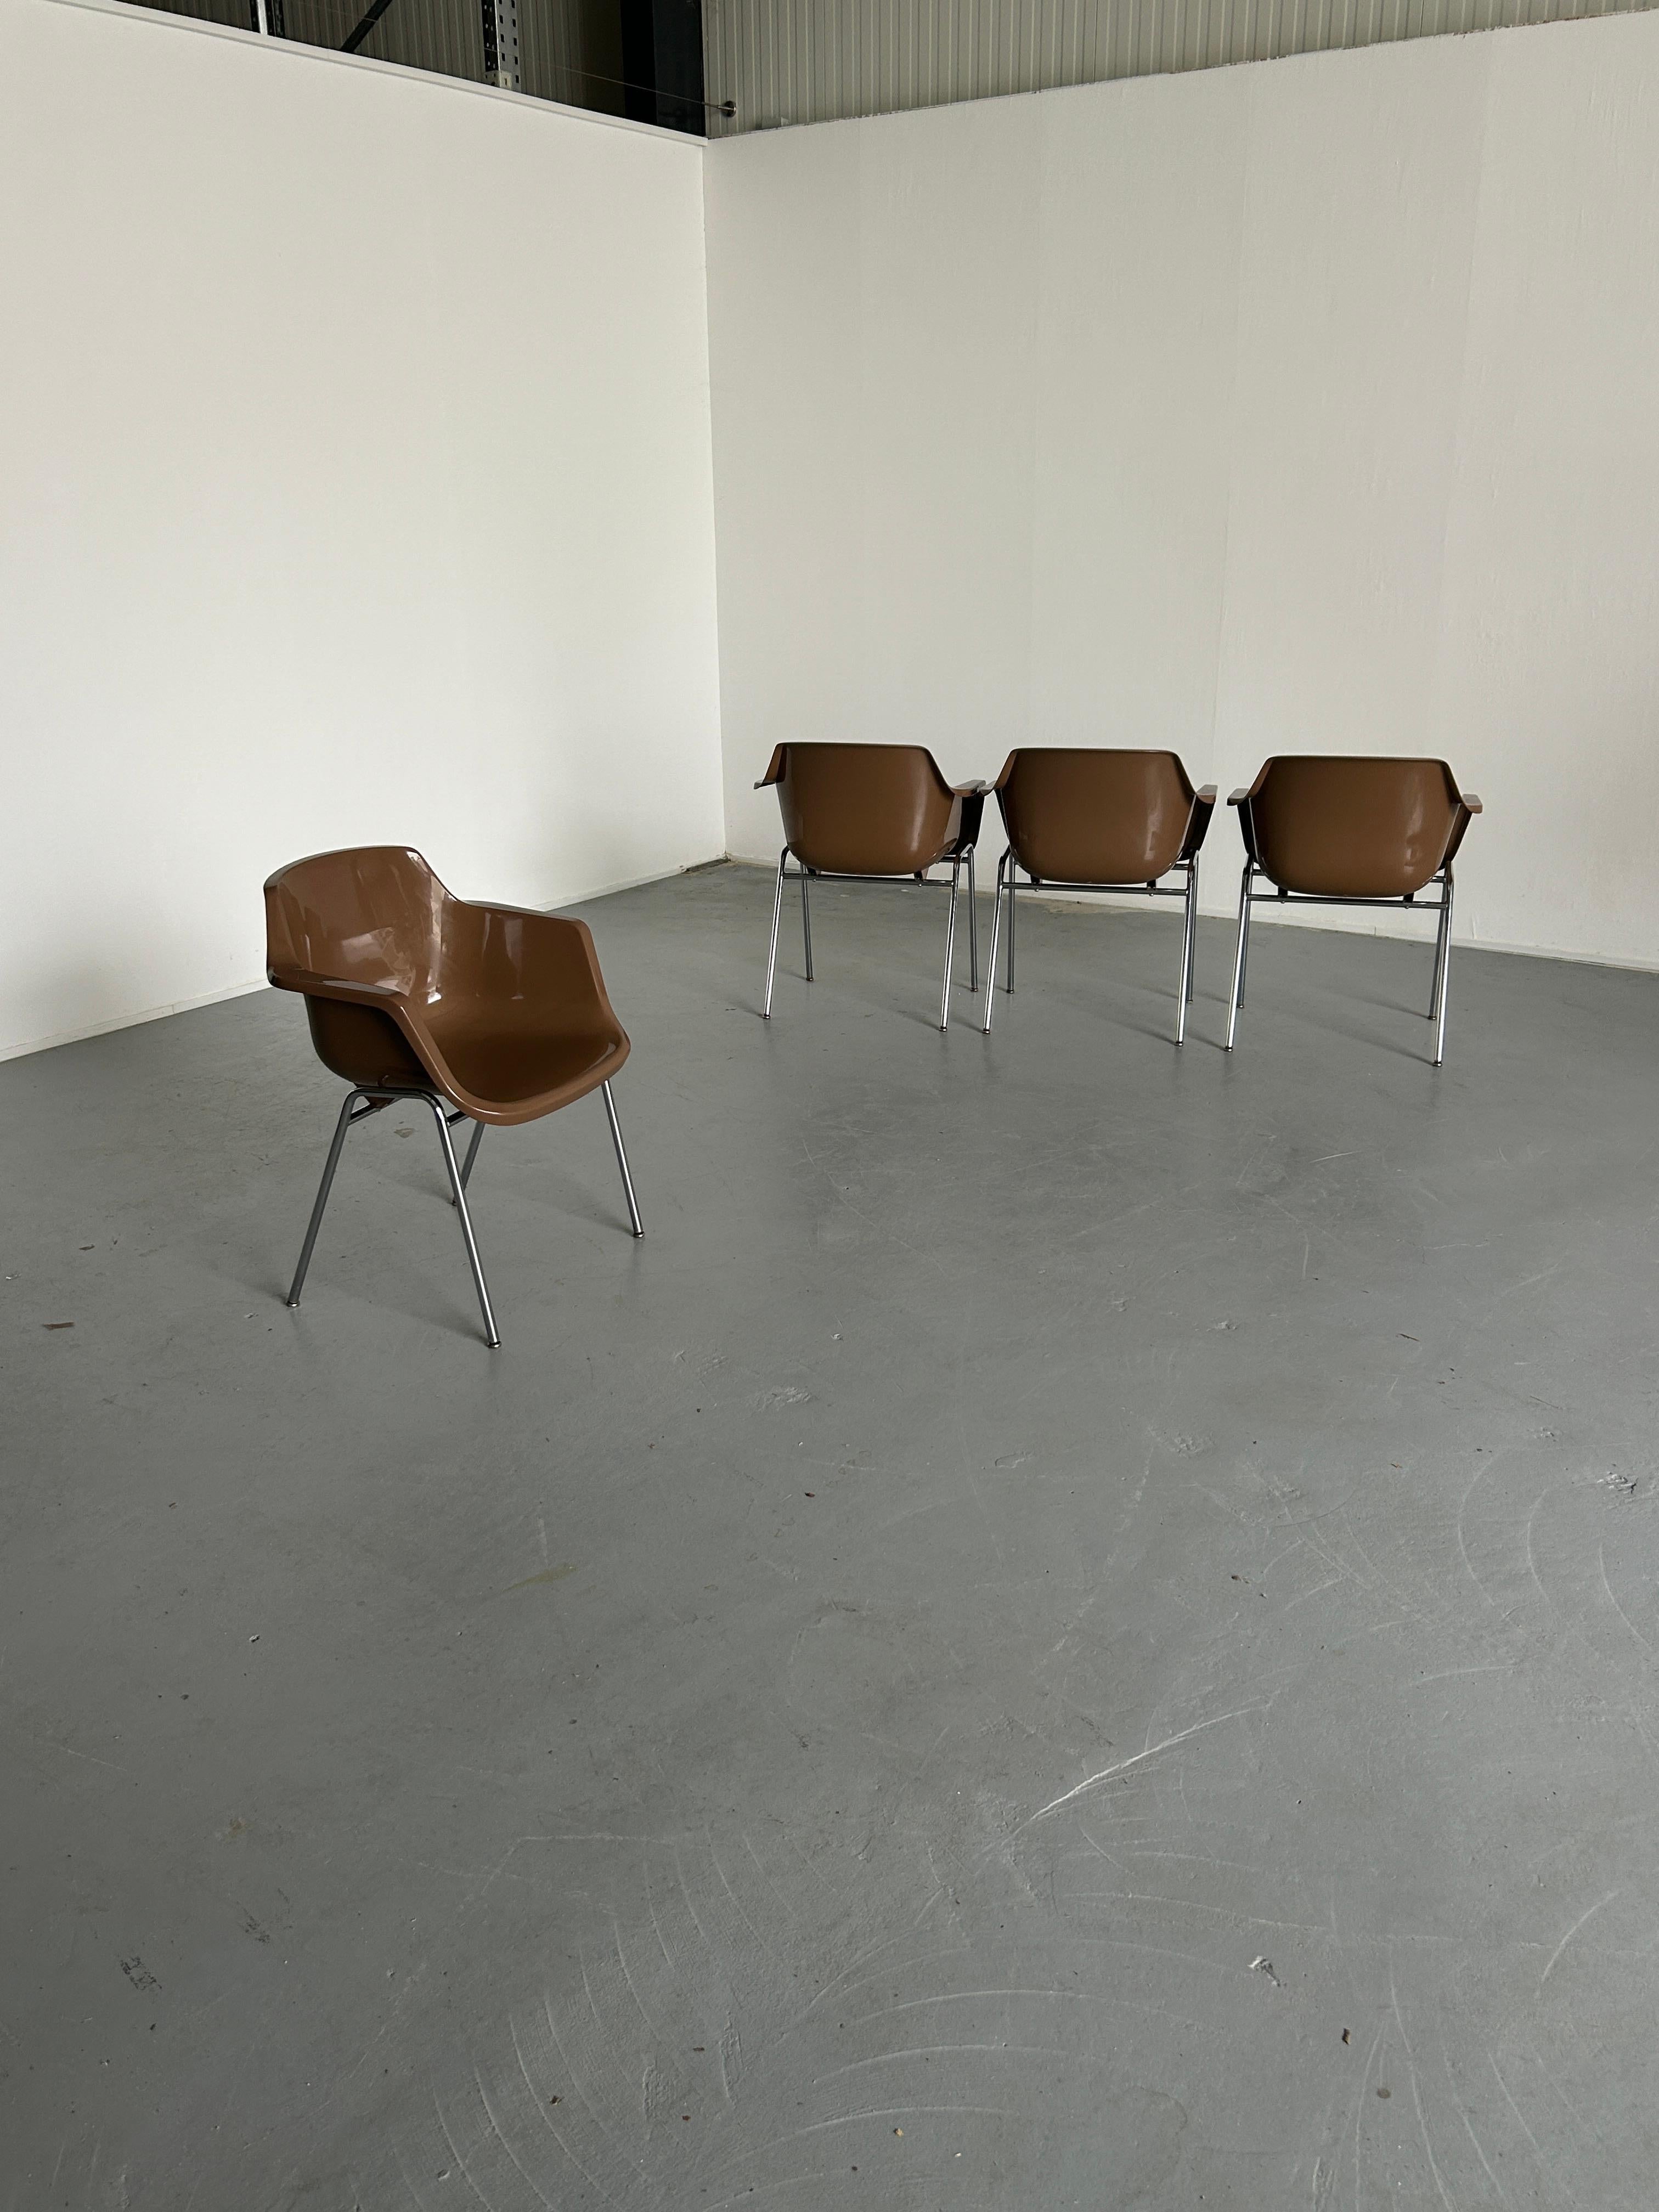 European 1 of 4 Vintage Mid-Century Shell Plastic Dining Chairs in style of Eames Shell  For Sale